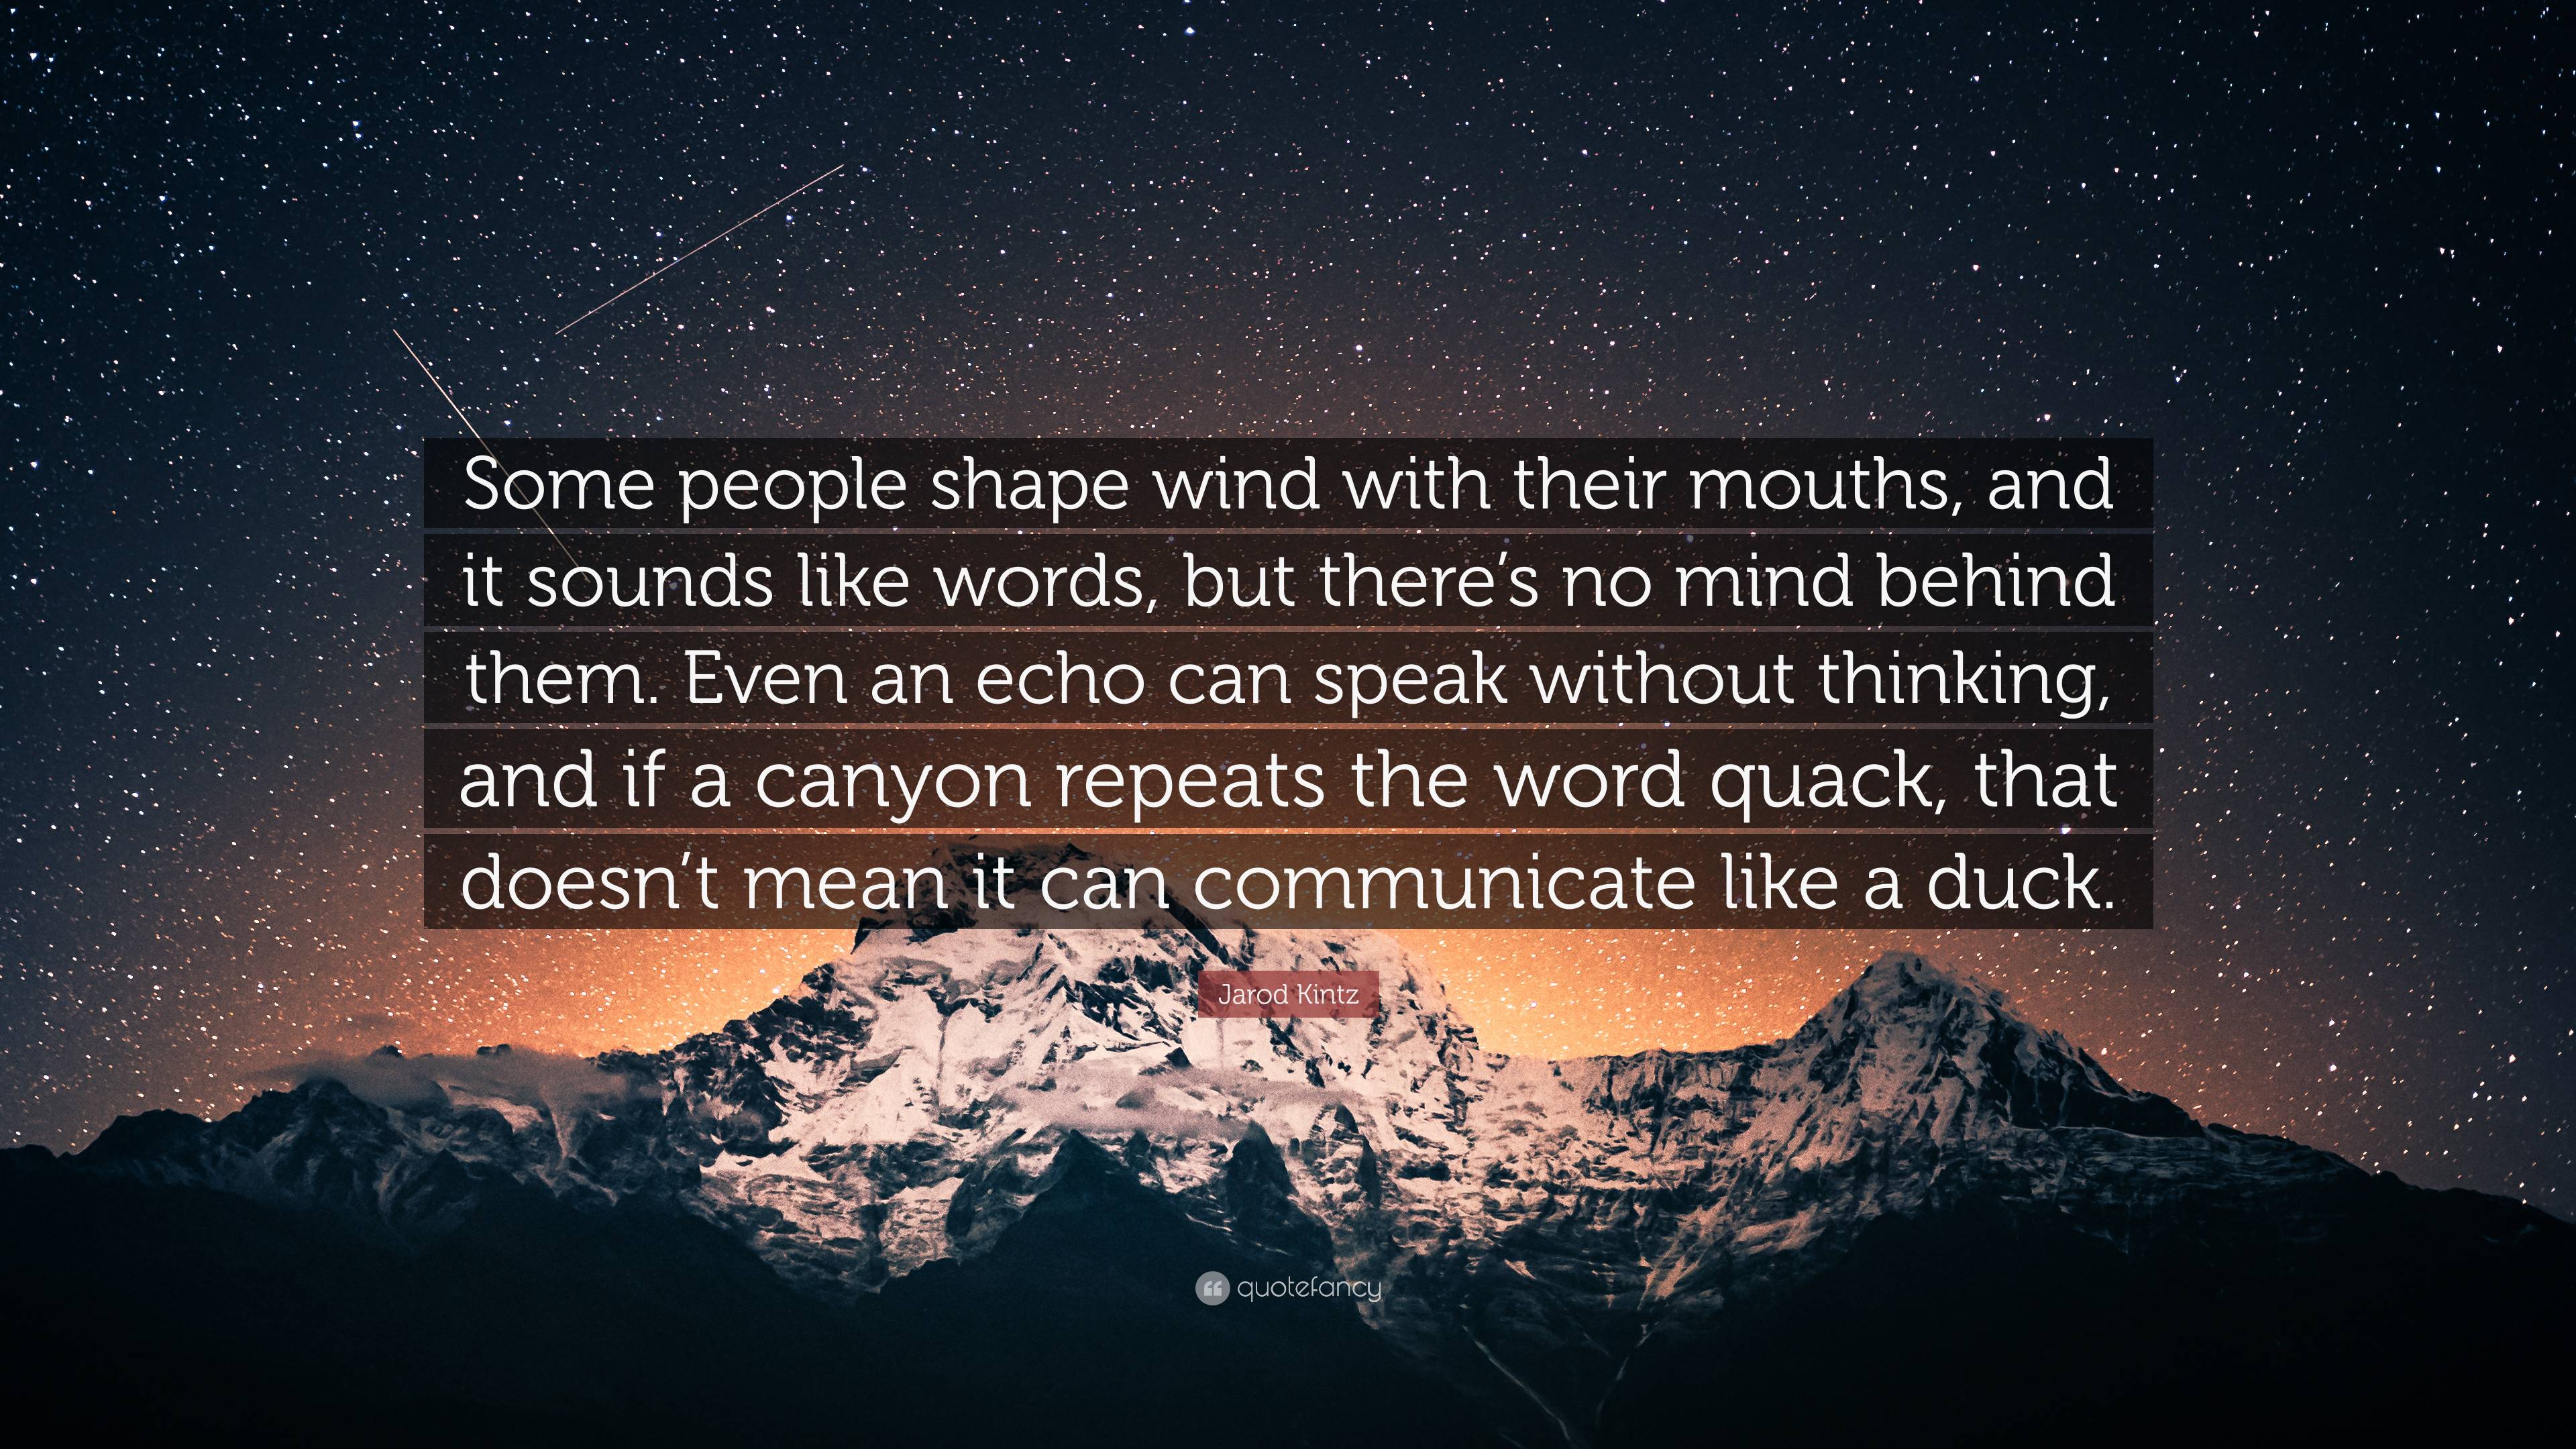 Jarod Kintz Quote: “Some people shape wind with their mouths, and